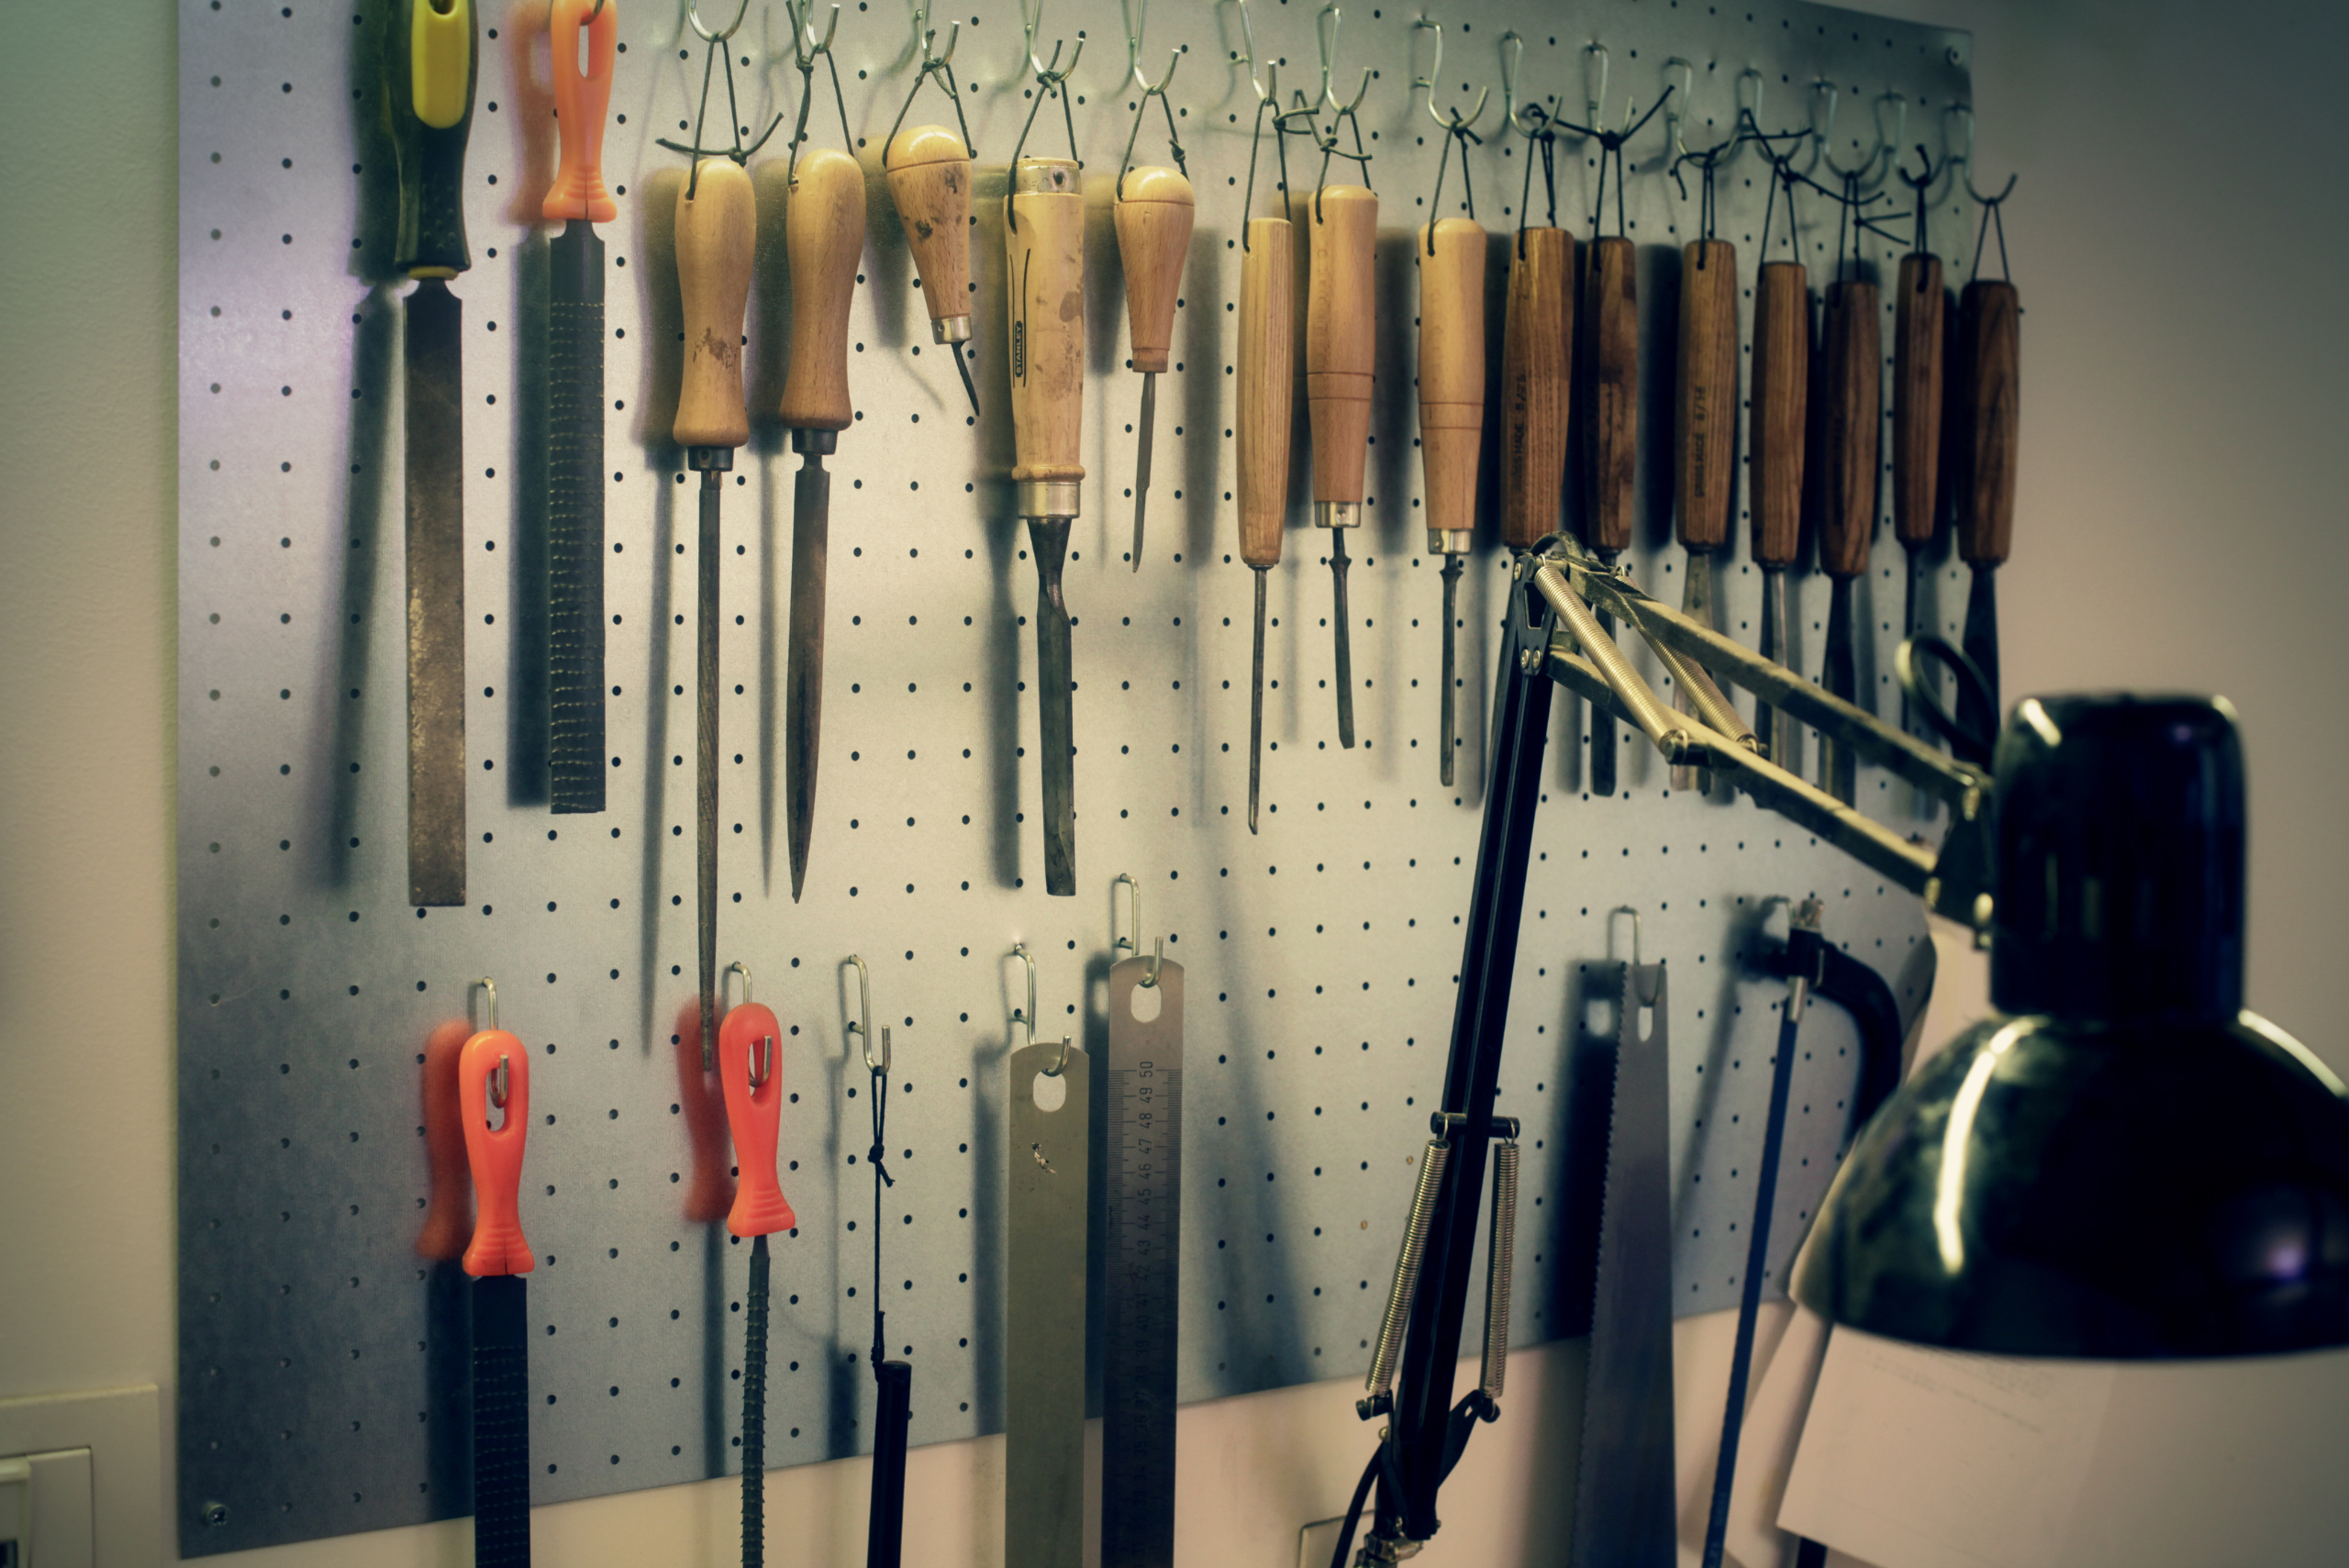 A tool bench flanked by wood-working tools hung on the wall.